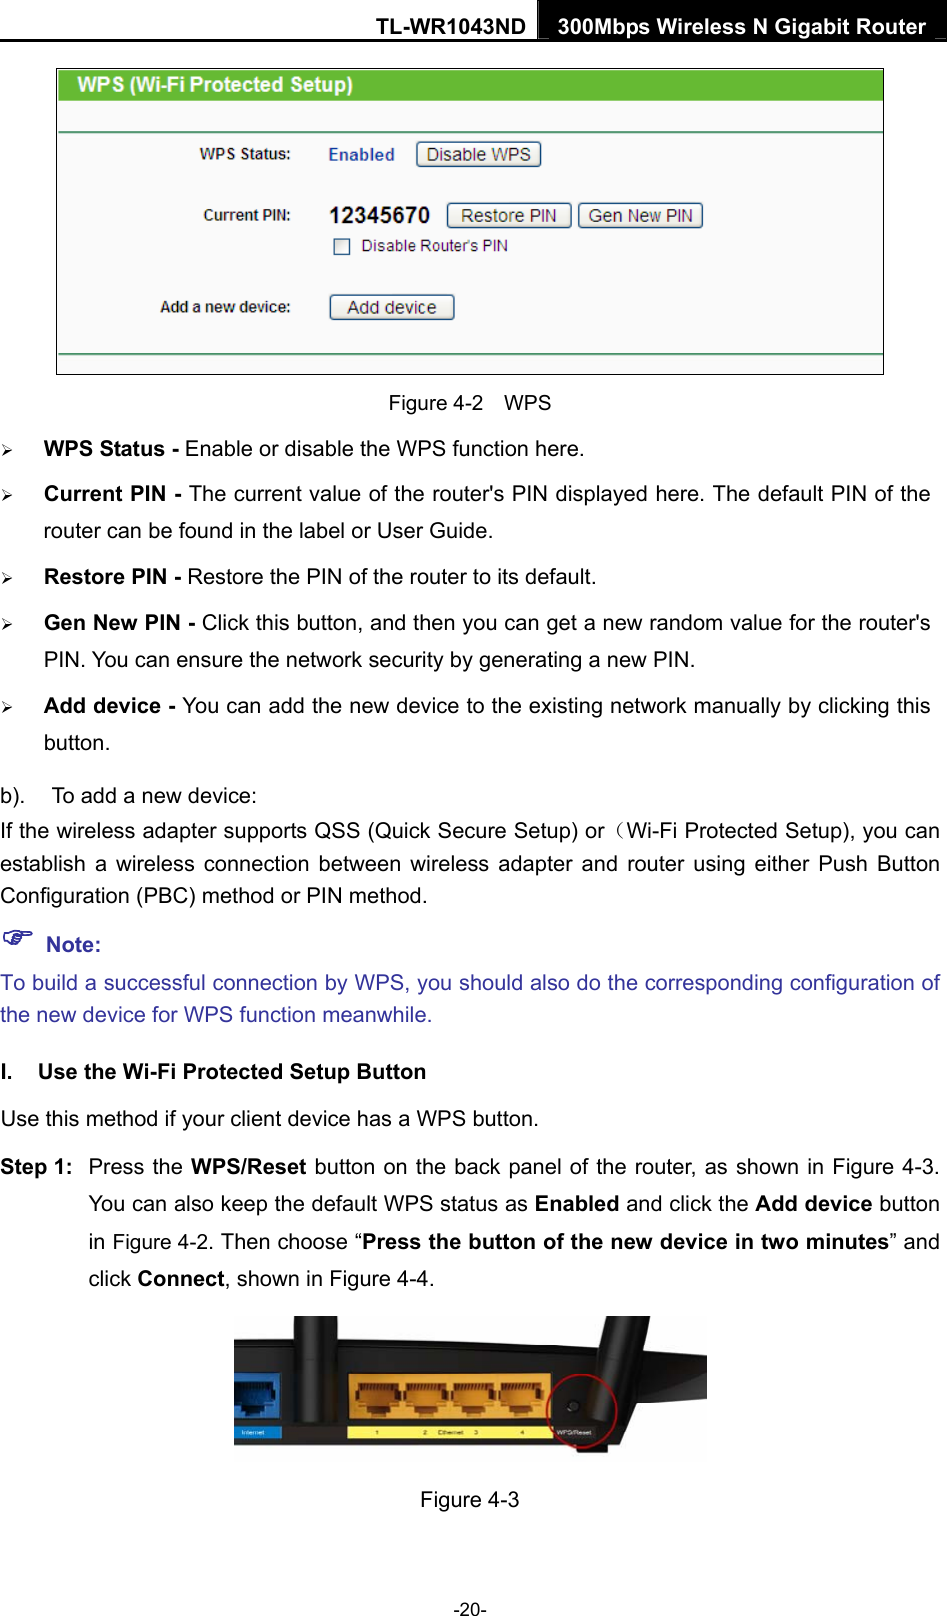 TL-WR1043ND 300Mbps Wireless N Gigabit Router   Figure 4-2    WPS ¾ WPS Status - Enable or disable the WPS function here.   ¾ Current PIN - The current value of the router&apos;s PIN displayed here. The default PIN of the router can be found in the label or User Guide.   ¾ Restore PIN - Restore the PIN of the router to its default.   ¾ Gen New PIN - Click this button, and then you can get a new random value for the router&apos;s PIN. You can ensure the network security by generating a new PIN.   ¾ Add device - You can add the new device to the existing network manually by clicking this button.  b).  To add a new device: If the wireless adapter supports QSS (Quick Secure Setup) or（Wi-Fi Protected Setup), you can establish a wireless connection between wireless adapter and router using either Push Button Configuration (PBC) method or PIN method. ) Note: To build a successful connection by WPS, you should also do the corresponding configuration of the new device for WPS function meanwhile. I.  Use the Wi-Fi Protected Setup Button Use this method if your client device has a WPS button. Step 1:  Press the WPS/Reset button on the back panel of the router, as shown in Figure 4-3. You can also keep the default WPS status as Enabled and click the Add device button in Figure 4-2. Then choose “Press the button of the new device in two minutes” and click Connect, shown in Figure 4-4.  Figure 4-3 -20- 